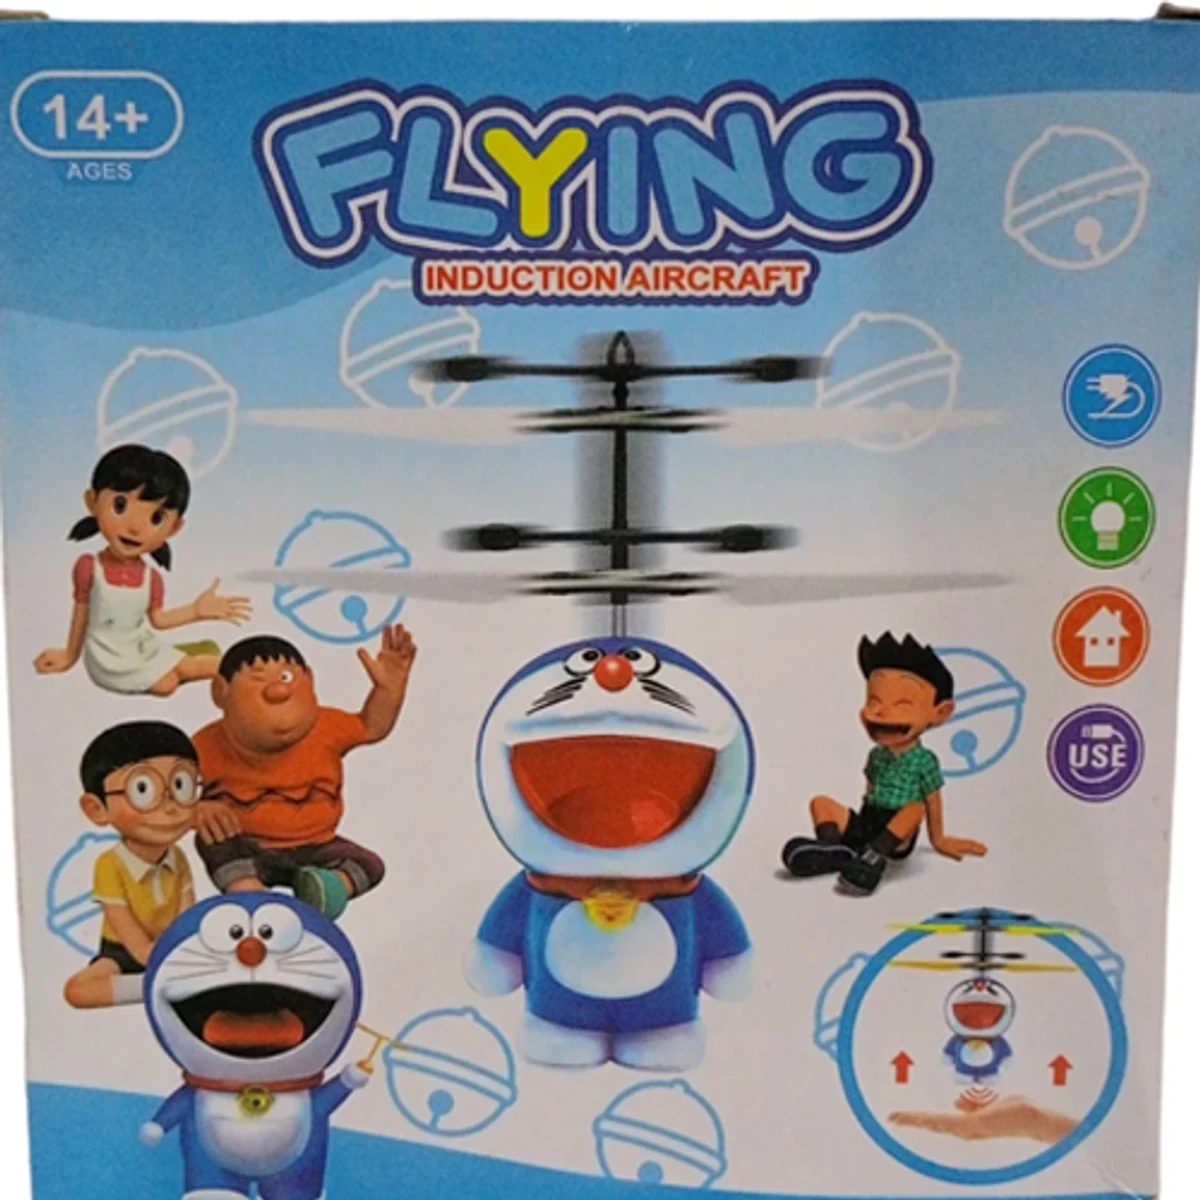 KIDS COLLECTION Flying Doraemon Toy with Sensor Based Flyer (Micro USB Chargeable)